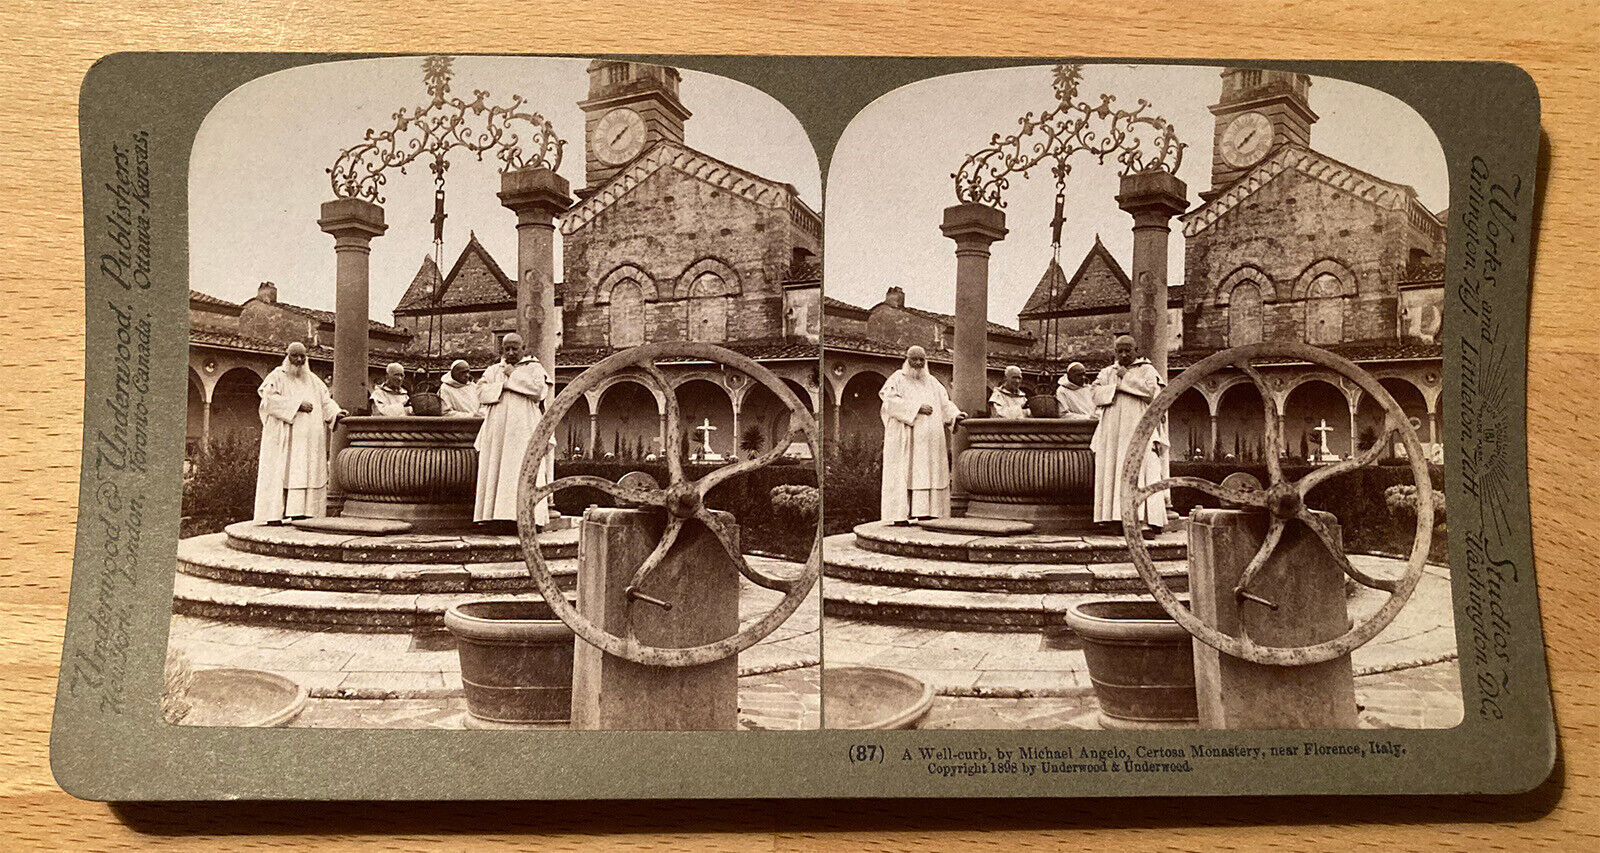 Well-curb, Michael Angelo – Certosa Monastery, Florence, Italy 1898 – Stereoview